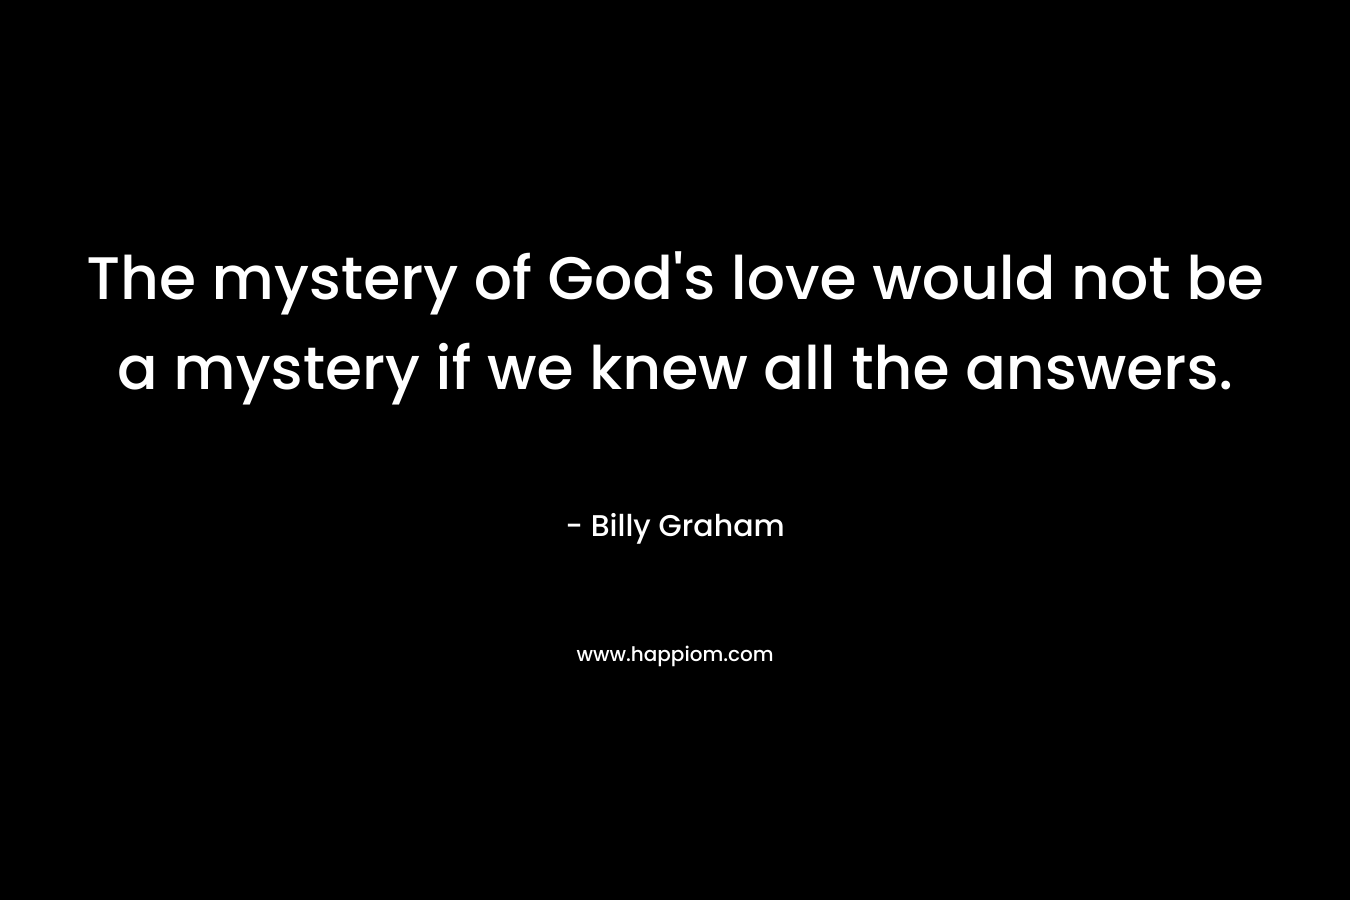 The mystery of God's love would not be a mystery if we knew all the answers.